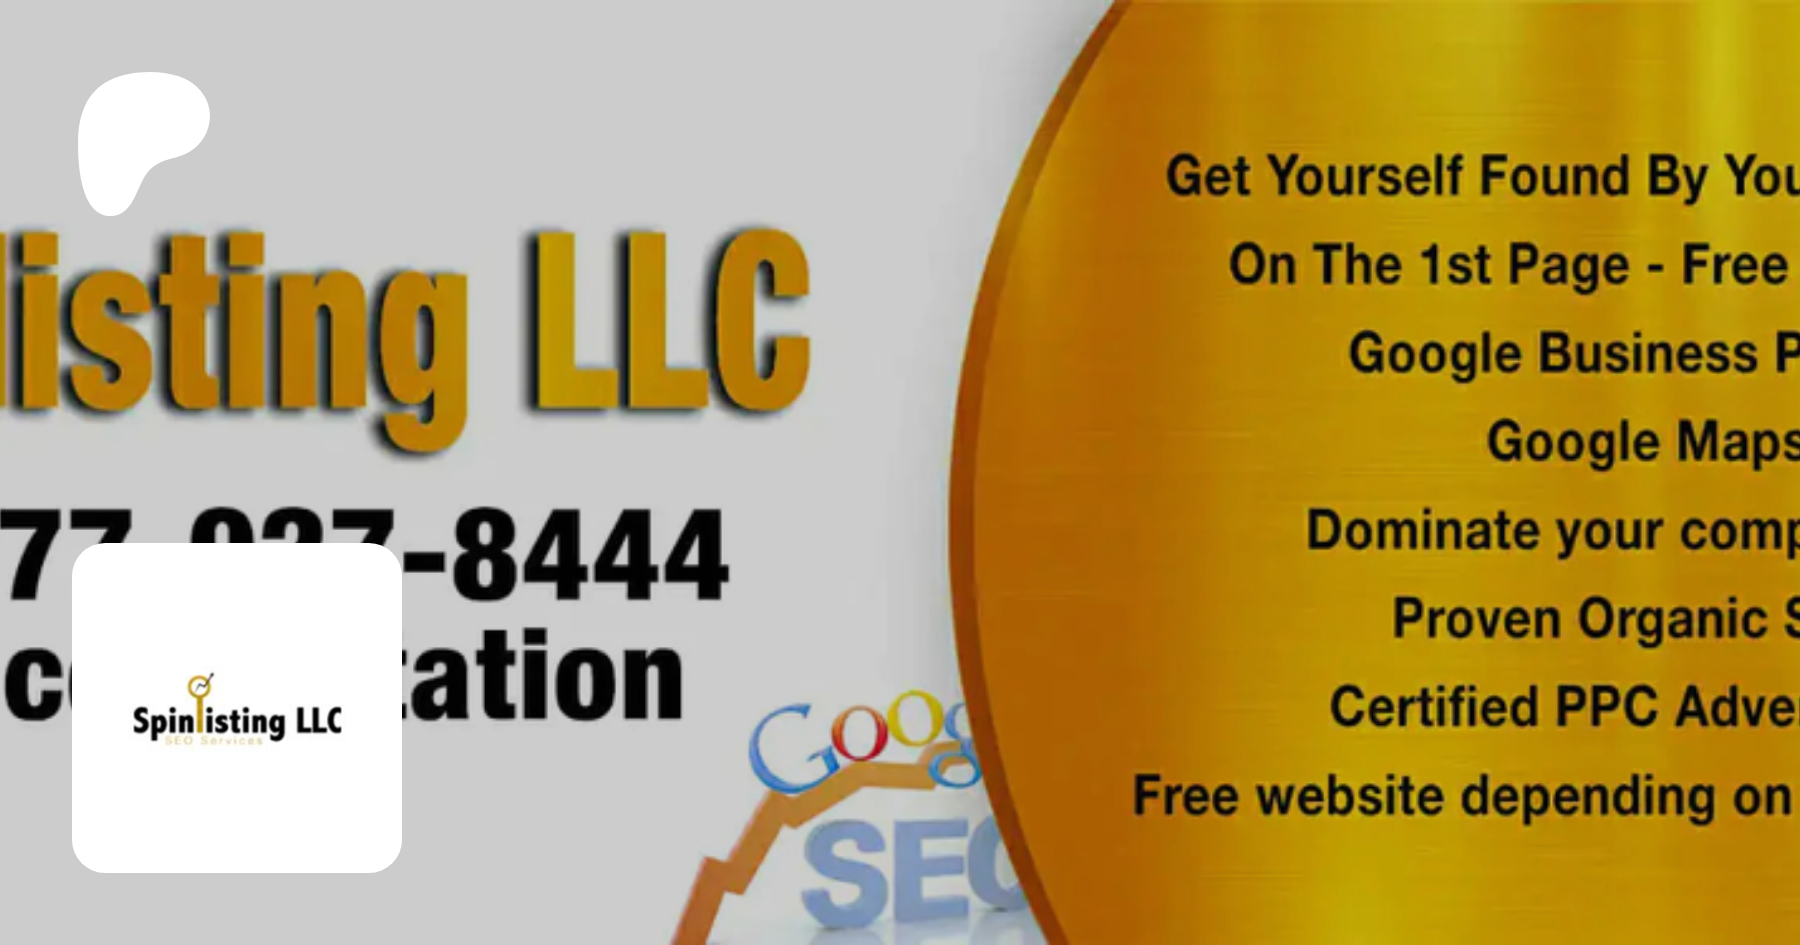 Local SEO for Ugly Houses | Spinlisting LLC